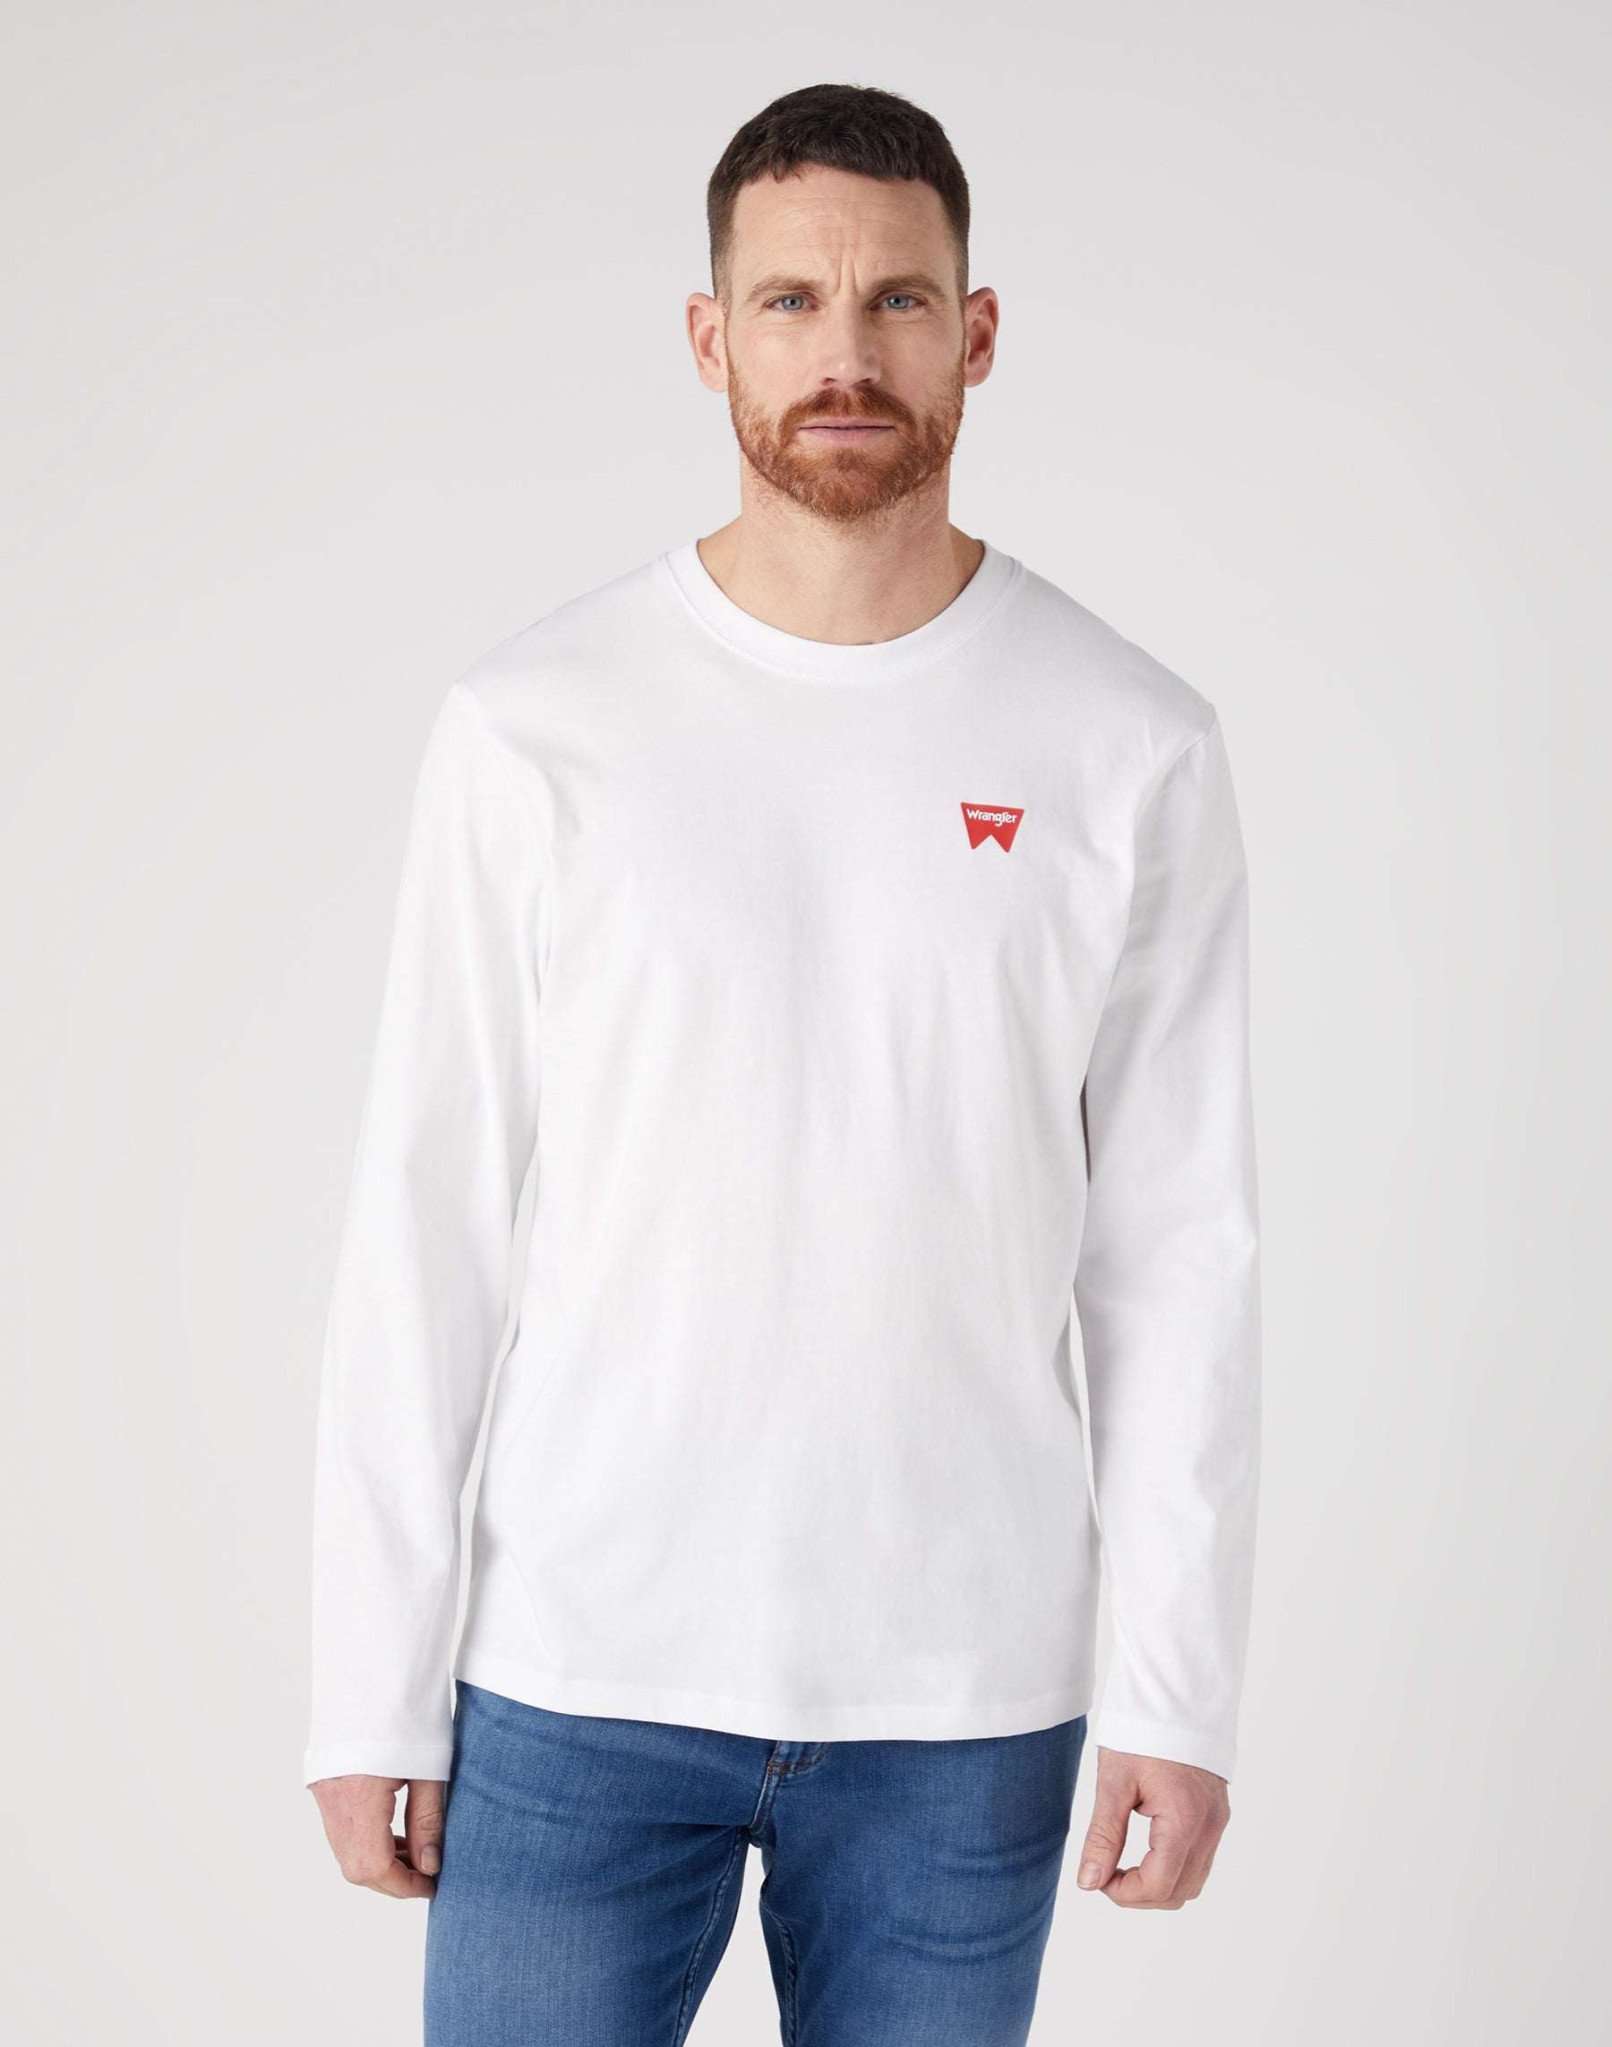 LS Sign Off Tee in White Pullover Wrangler   